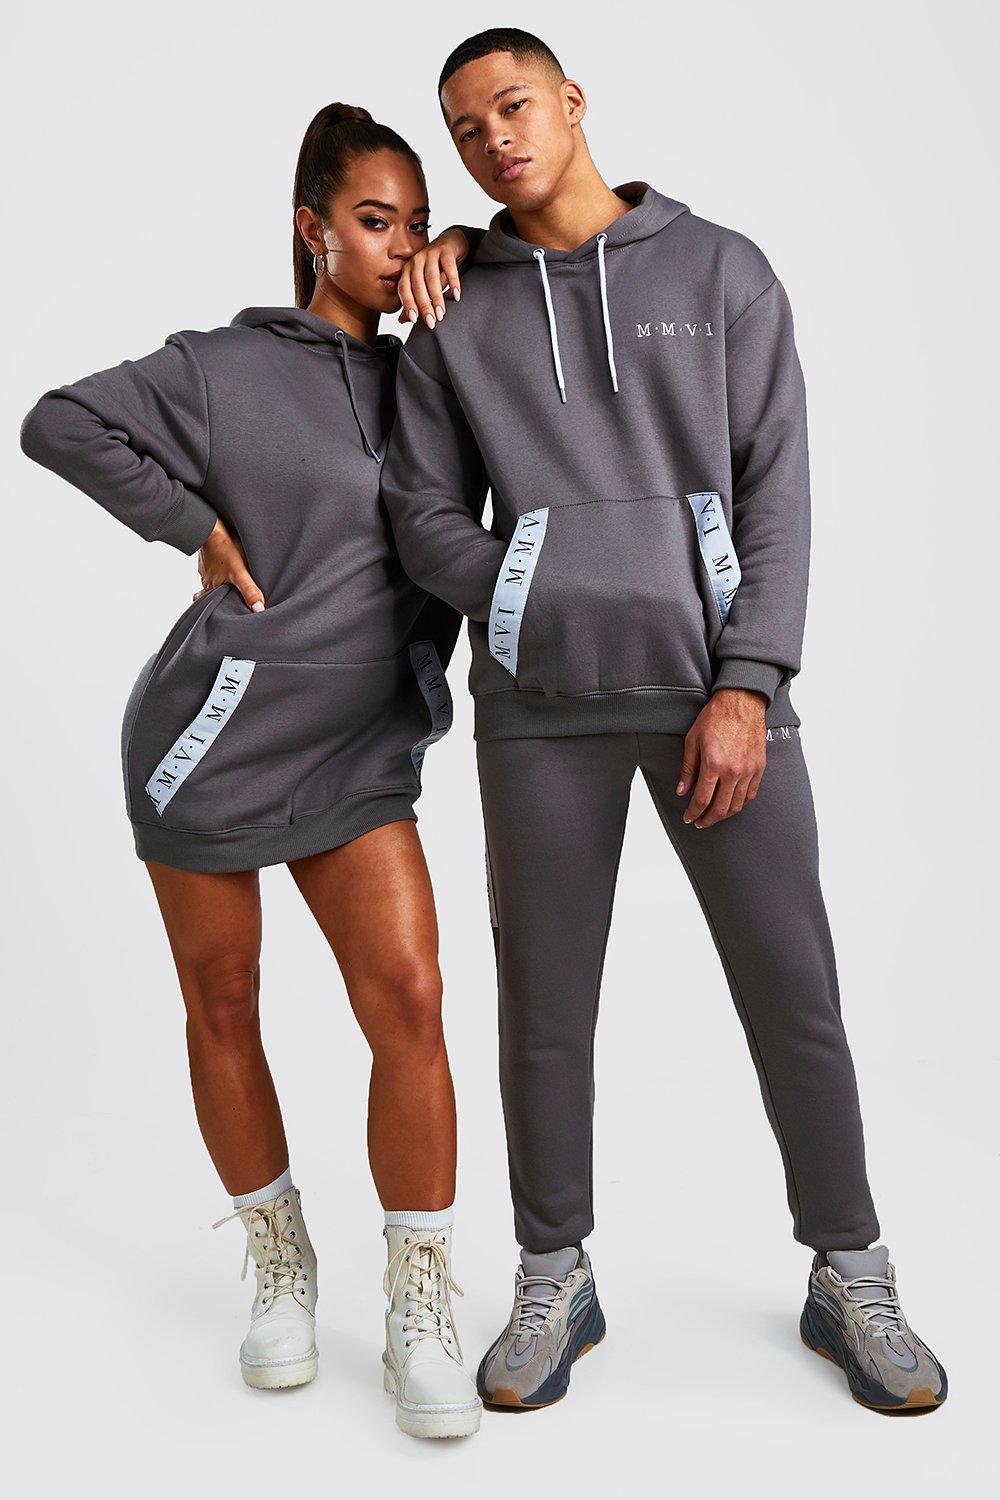 Baby koppeling Wijden Adidas Matching Couple Outfits Outlet - learning.esc.edu.ar 1691728496